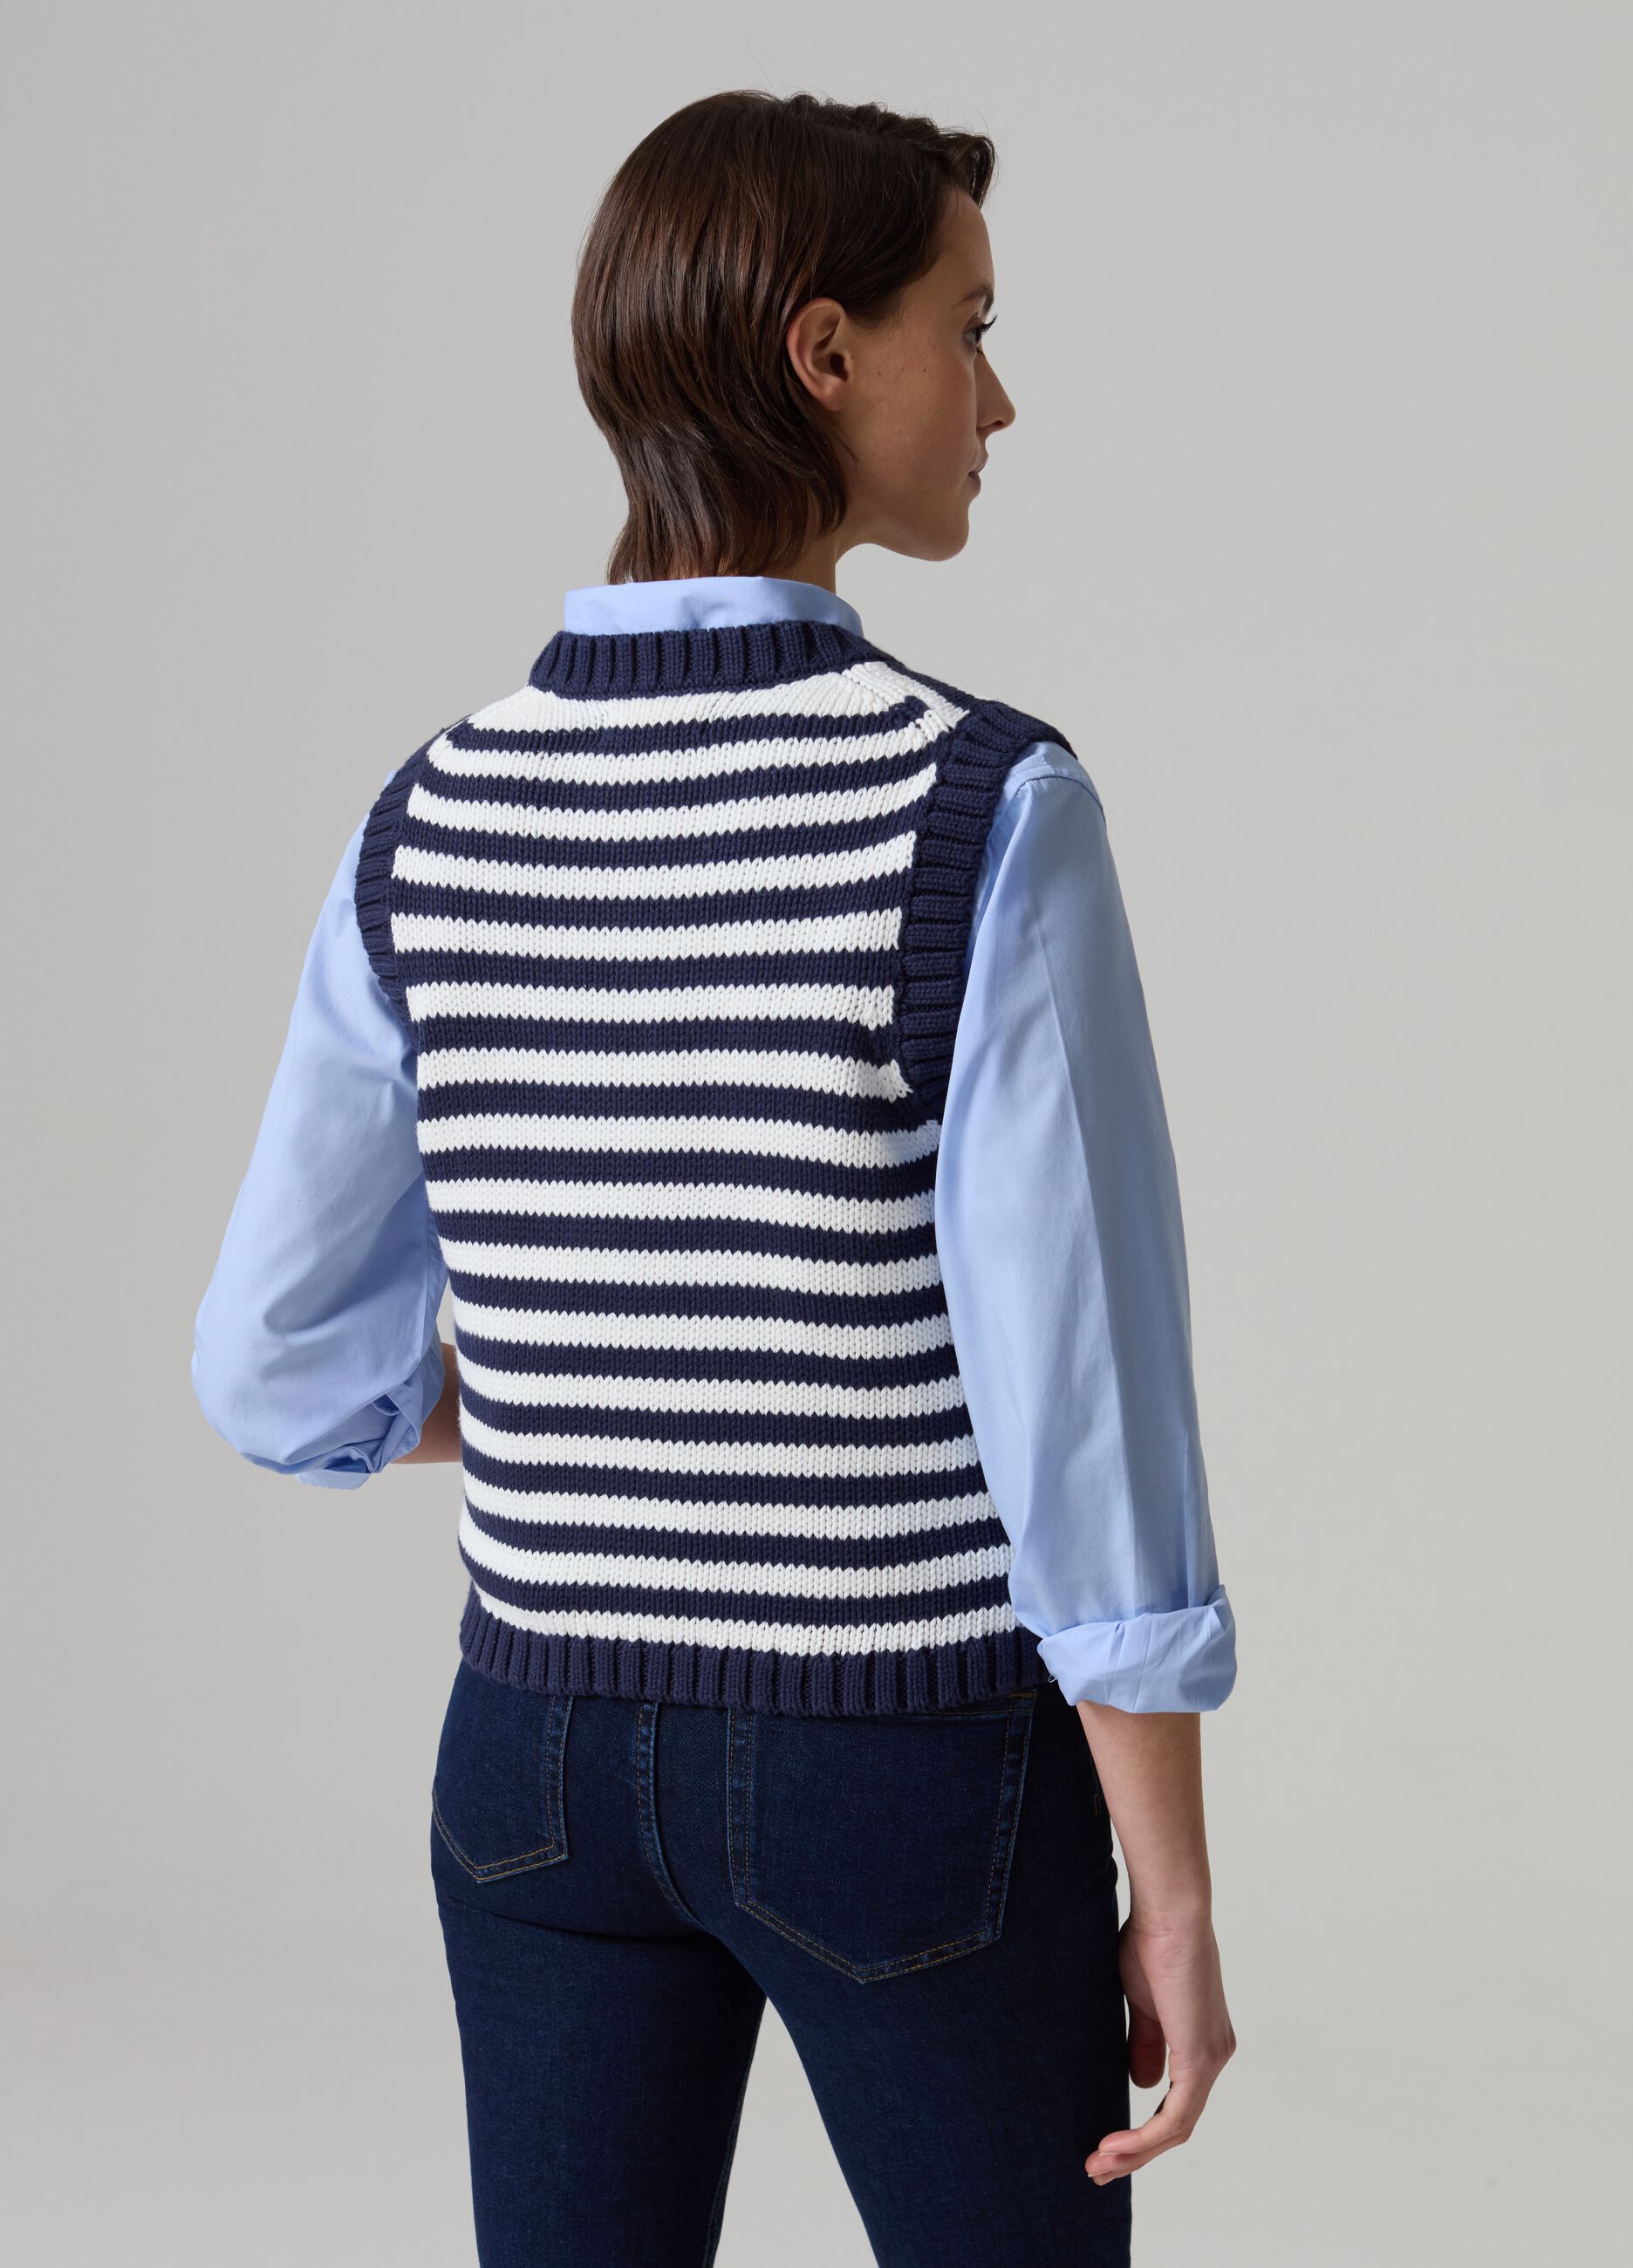 Closed gilet with ribbing and striped pattern